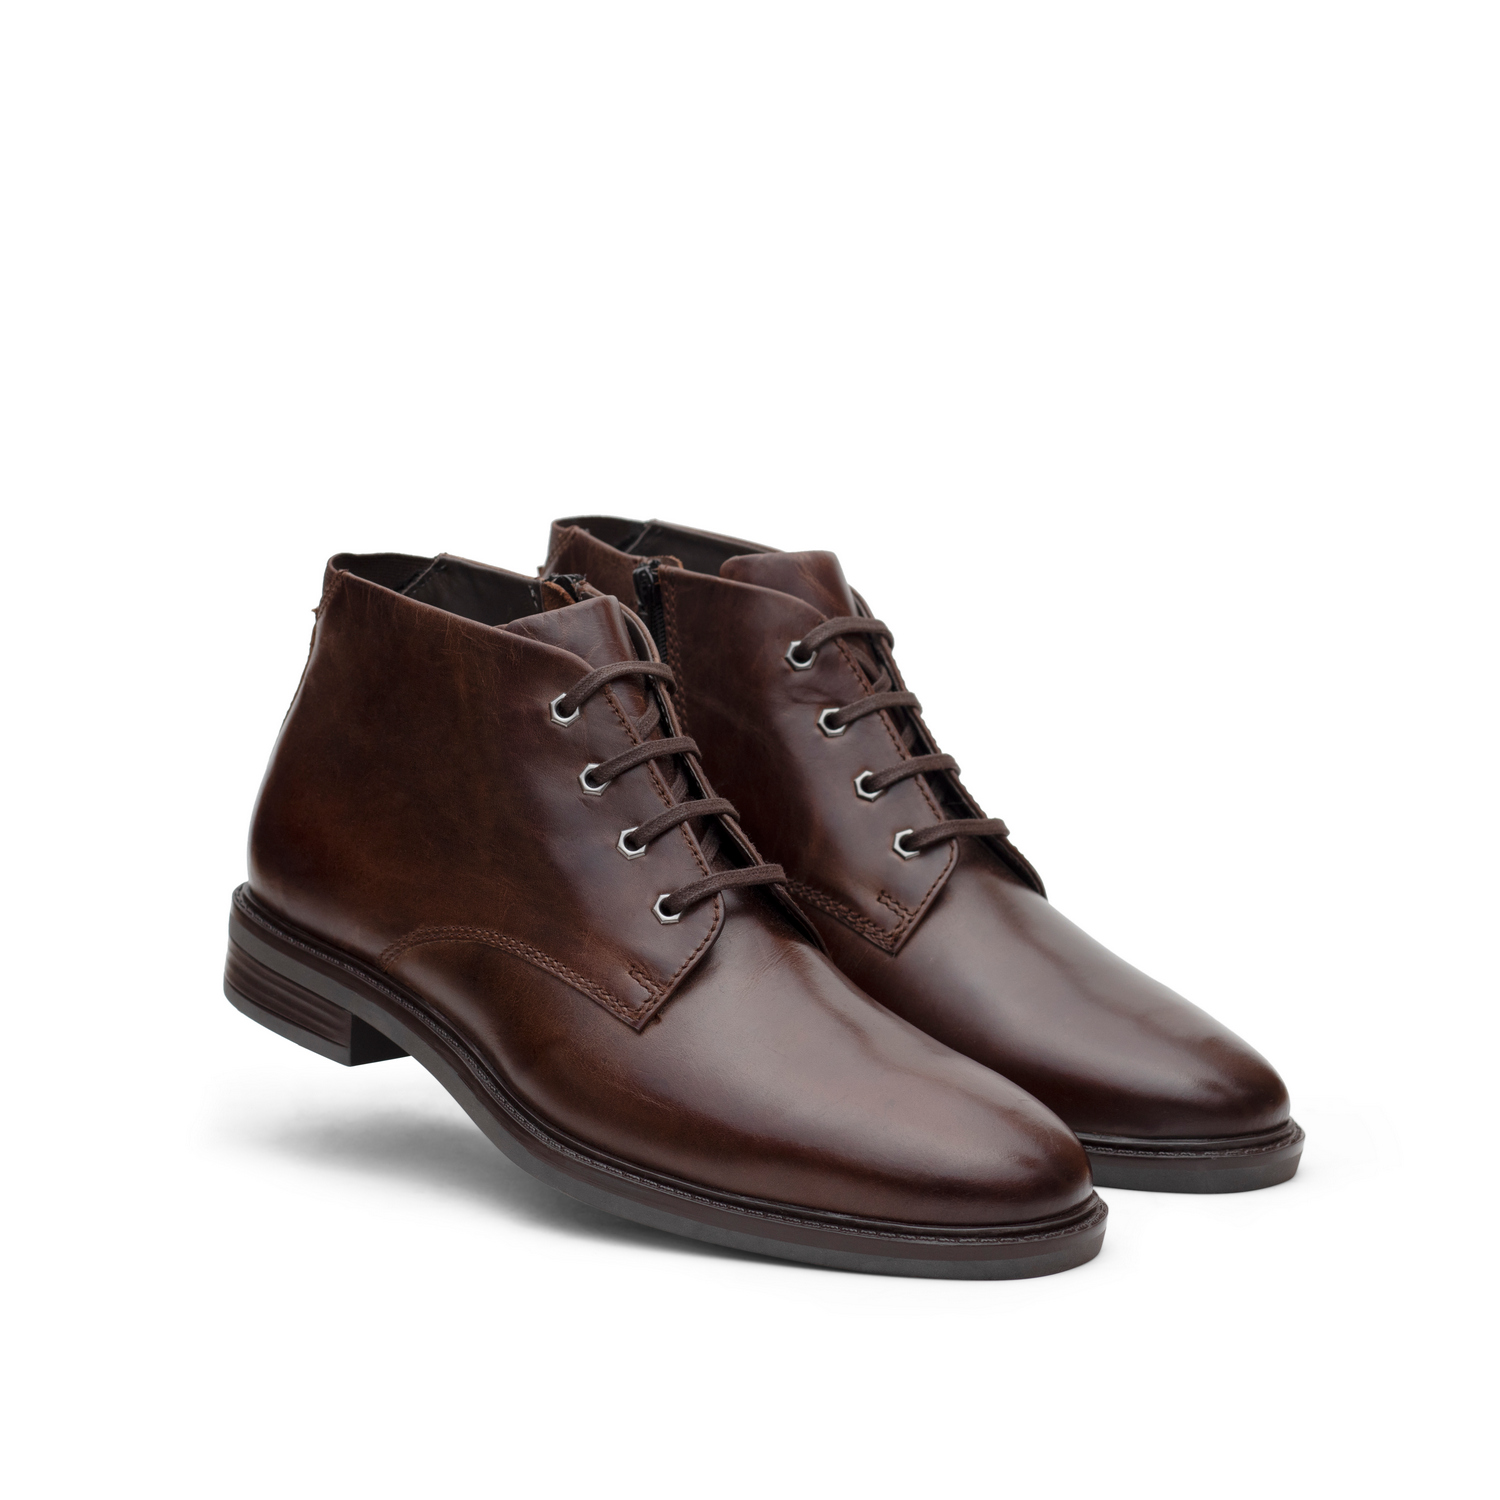 Formal Brown Shoes - MNJ Shoes - Brand 